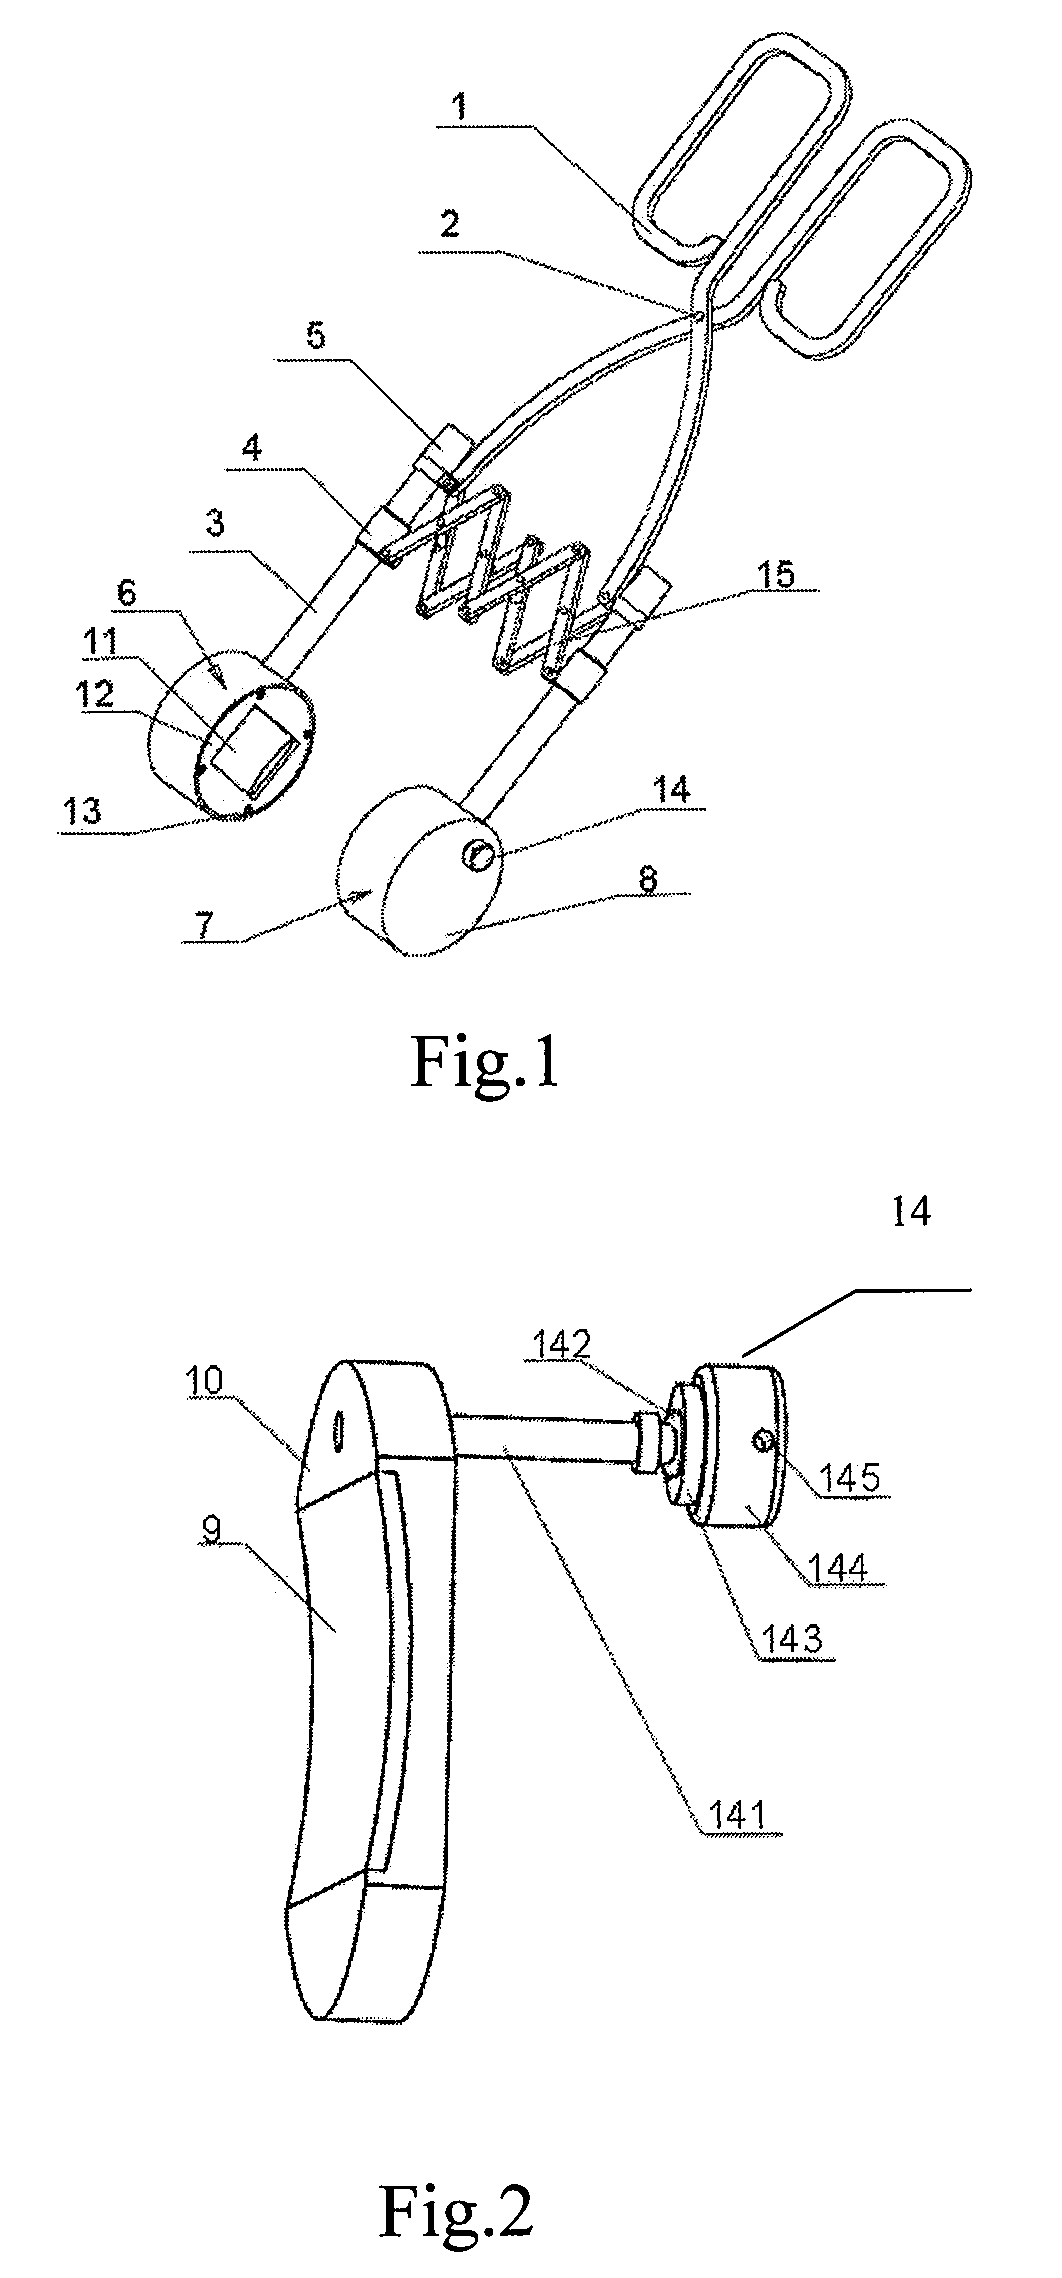 Ultrasound treatment clamp